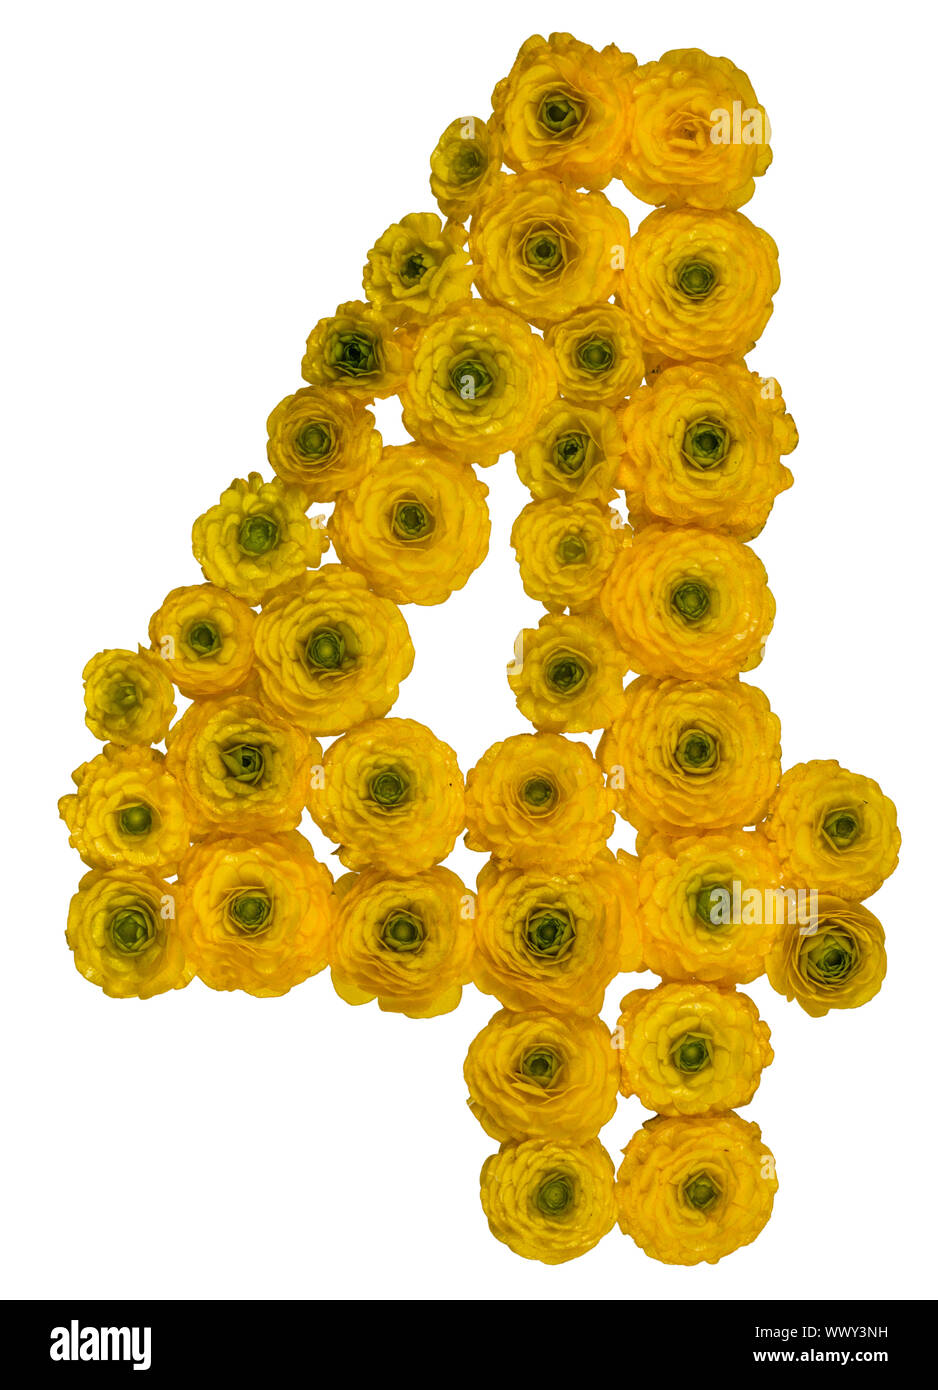 Arabic numeral 4, four, from yellow flowers of buttercup, isolated on white background Stock Photo